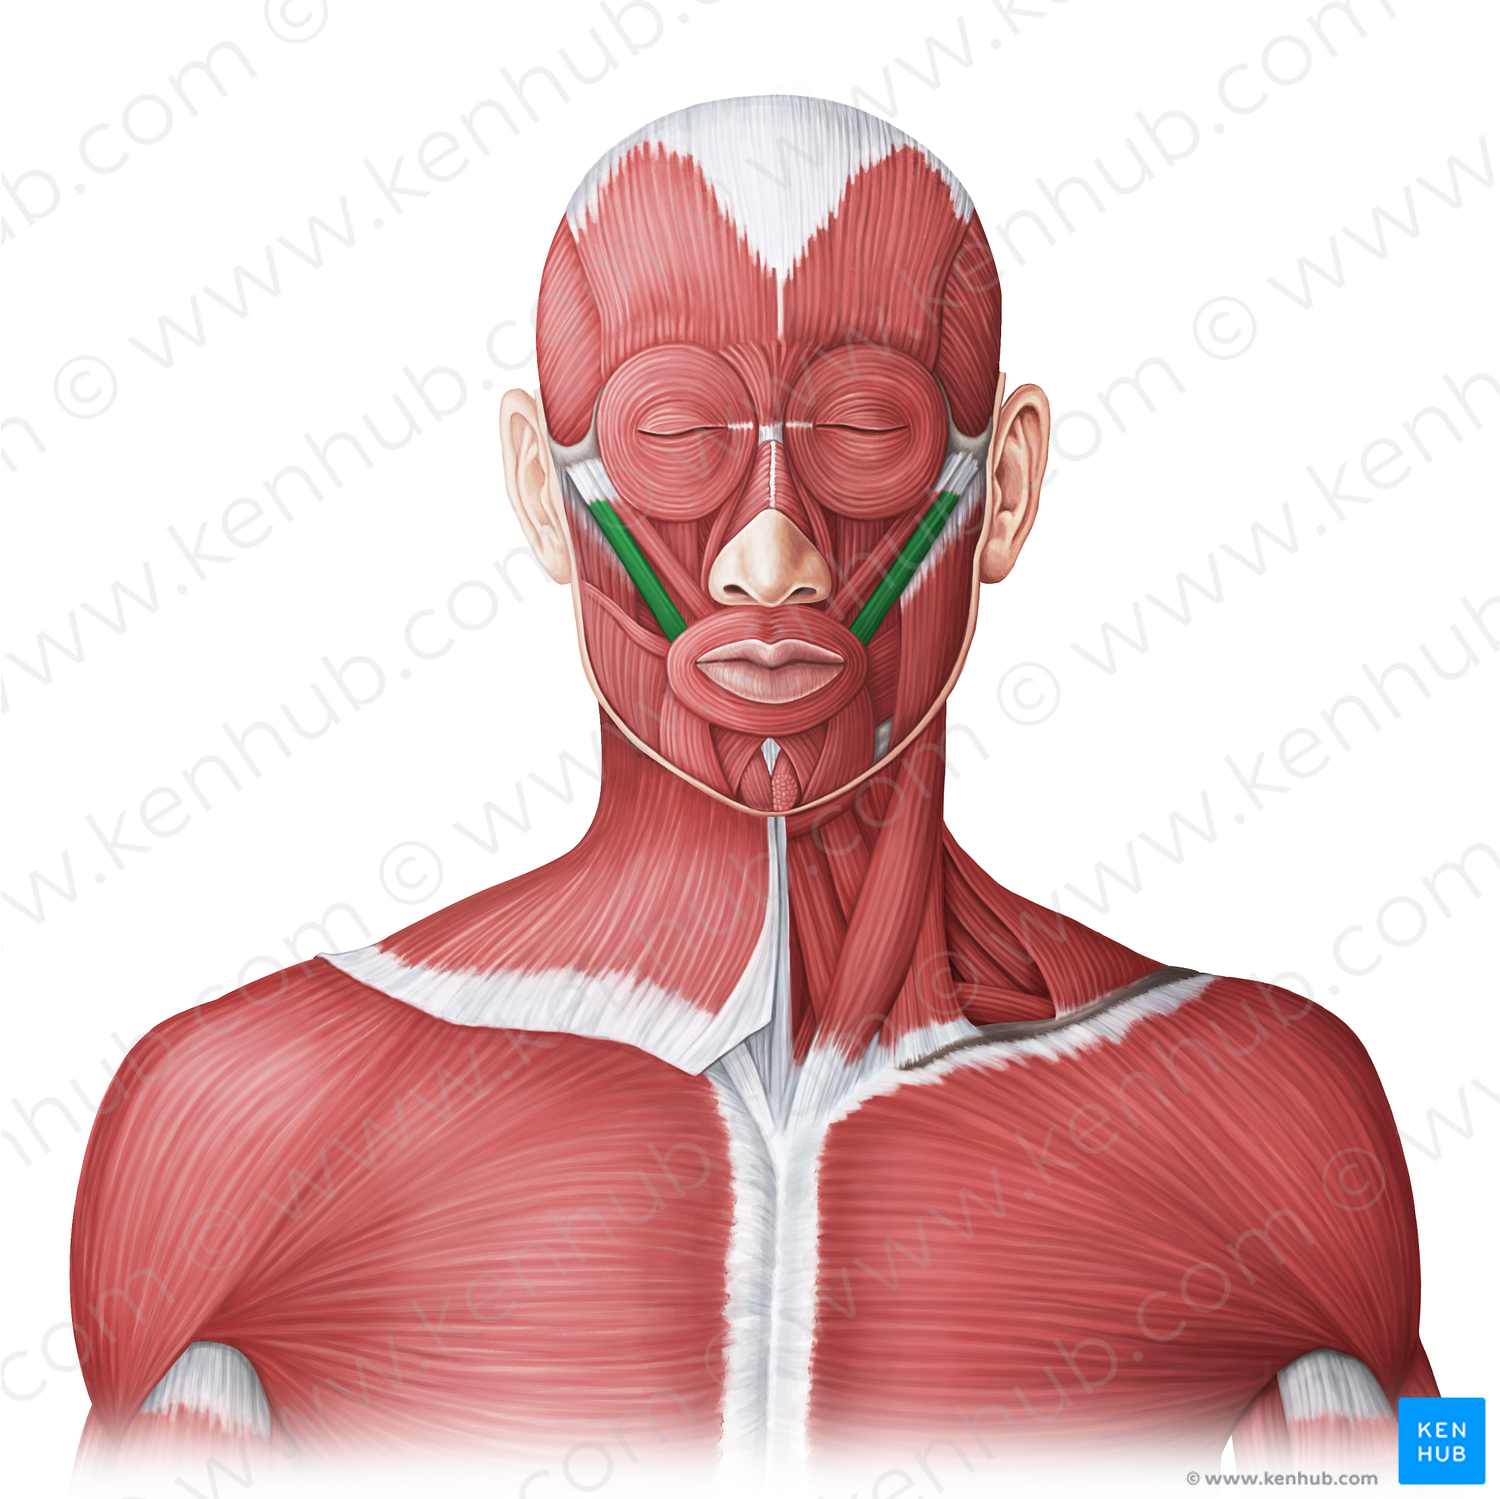 Zygomaticus major muscle (#20015)